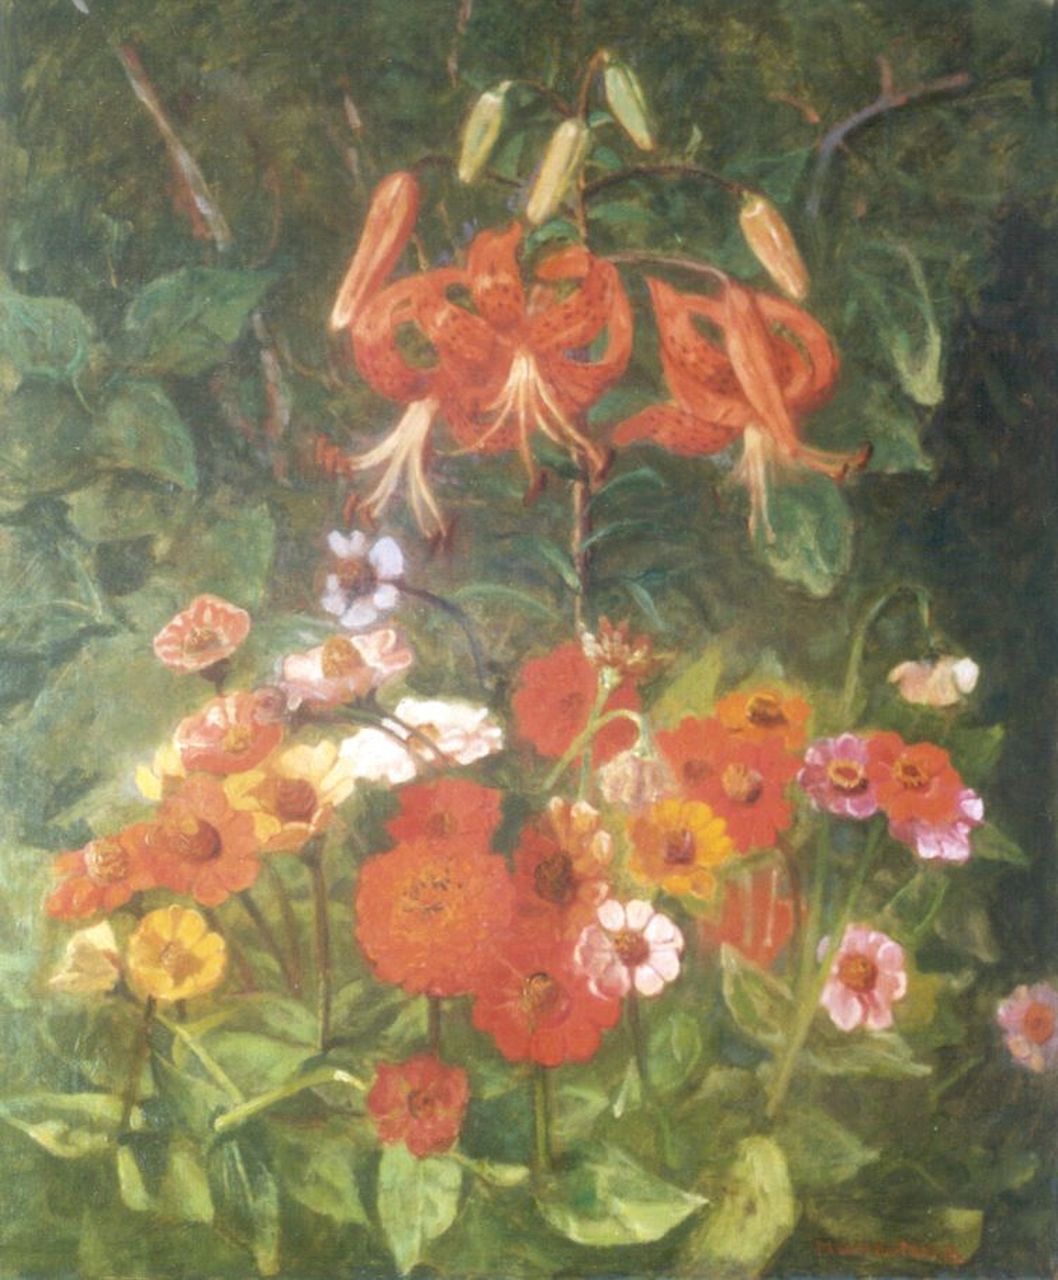 Wandscheer M.W.  | Maria Wilhelmina 'Marie' Wandscheer, Lilies and zinnias, oil on canvas 65.5 x 56.6 cm, signed l.r. and on stretcher